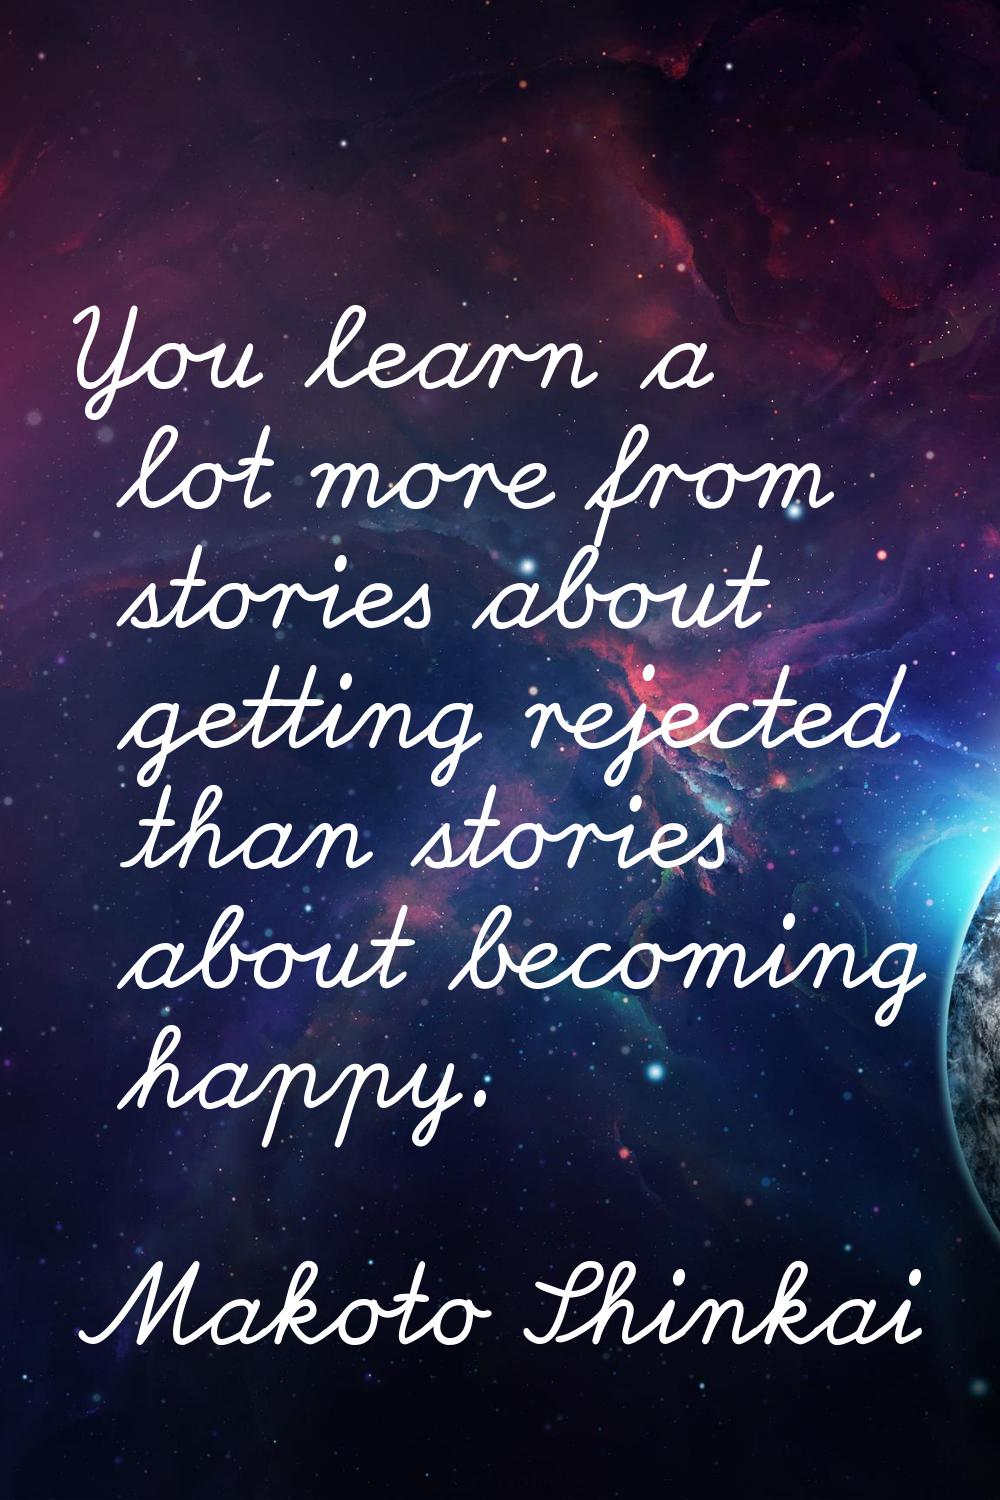 You learn a lot more from stories about getting rejected than stories about becoming happy.